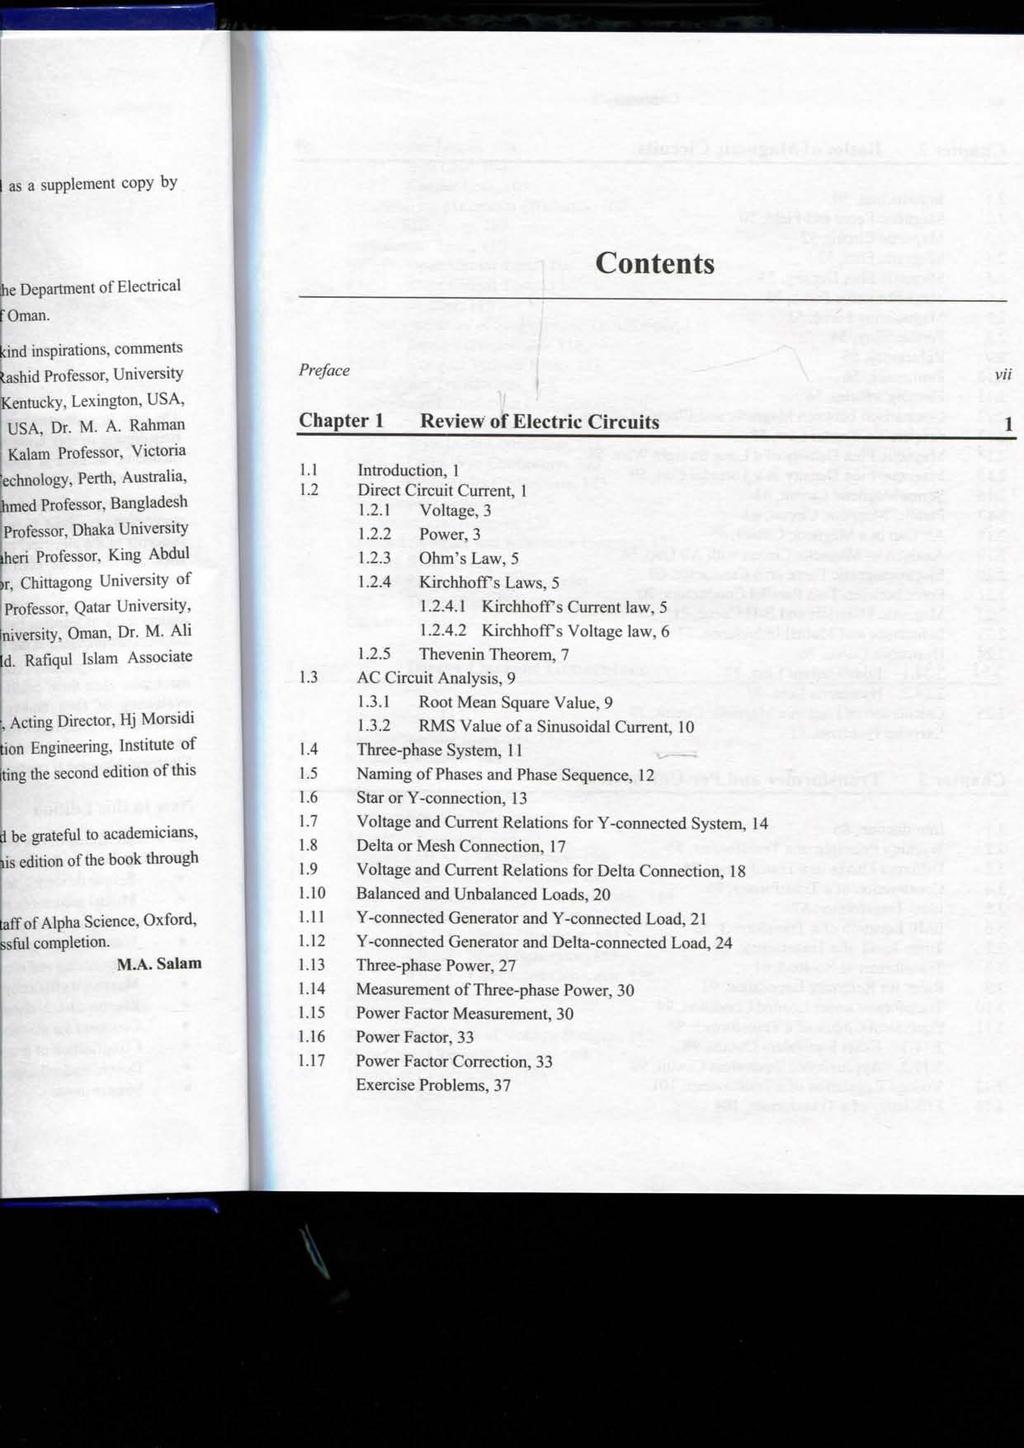 Preface ; Chapter 1 Review of Electric Circuitd 1.1 Introduction, 1 1.2 Direct Circuit Current, 1 1.2.1 Voltage, 3 1.2.2 Power, 3 1.2.3 Ohm's Law, 5 1.2.4 KirchhofTs Laws, 5 1.2.4.1 Kirchhoff s Current law, 5 1.